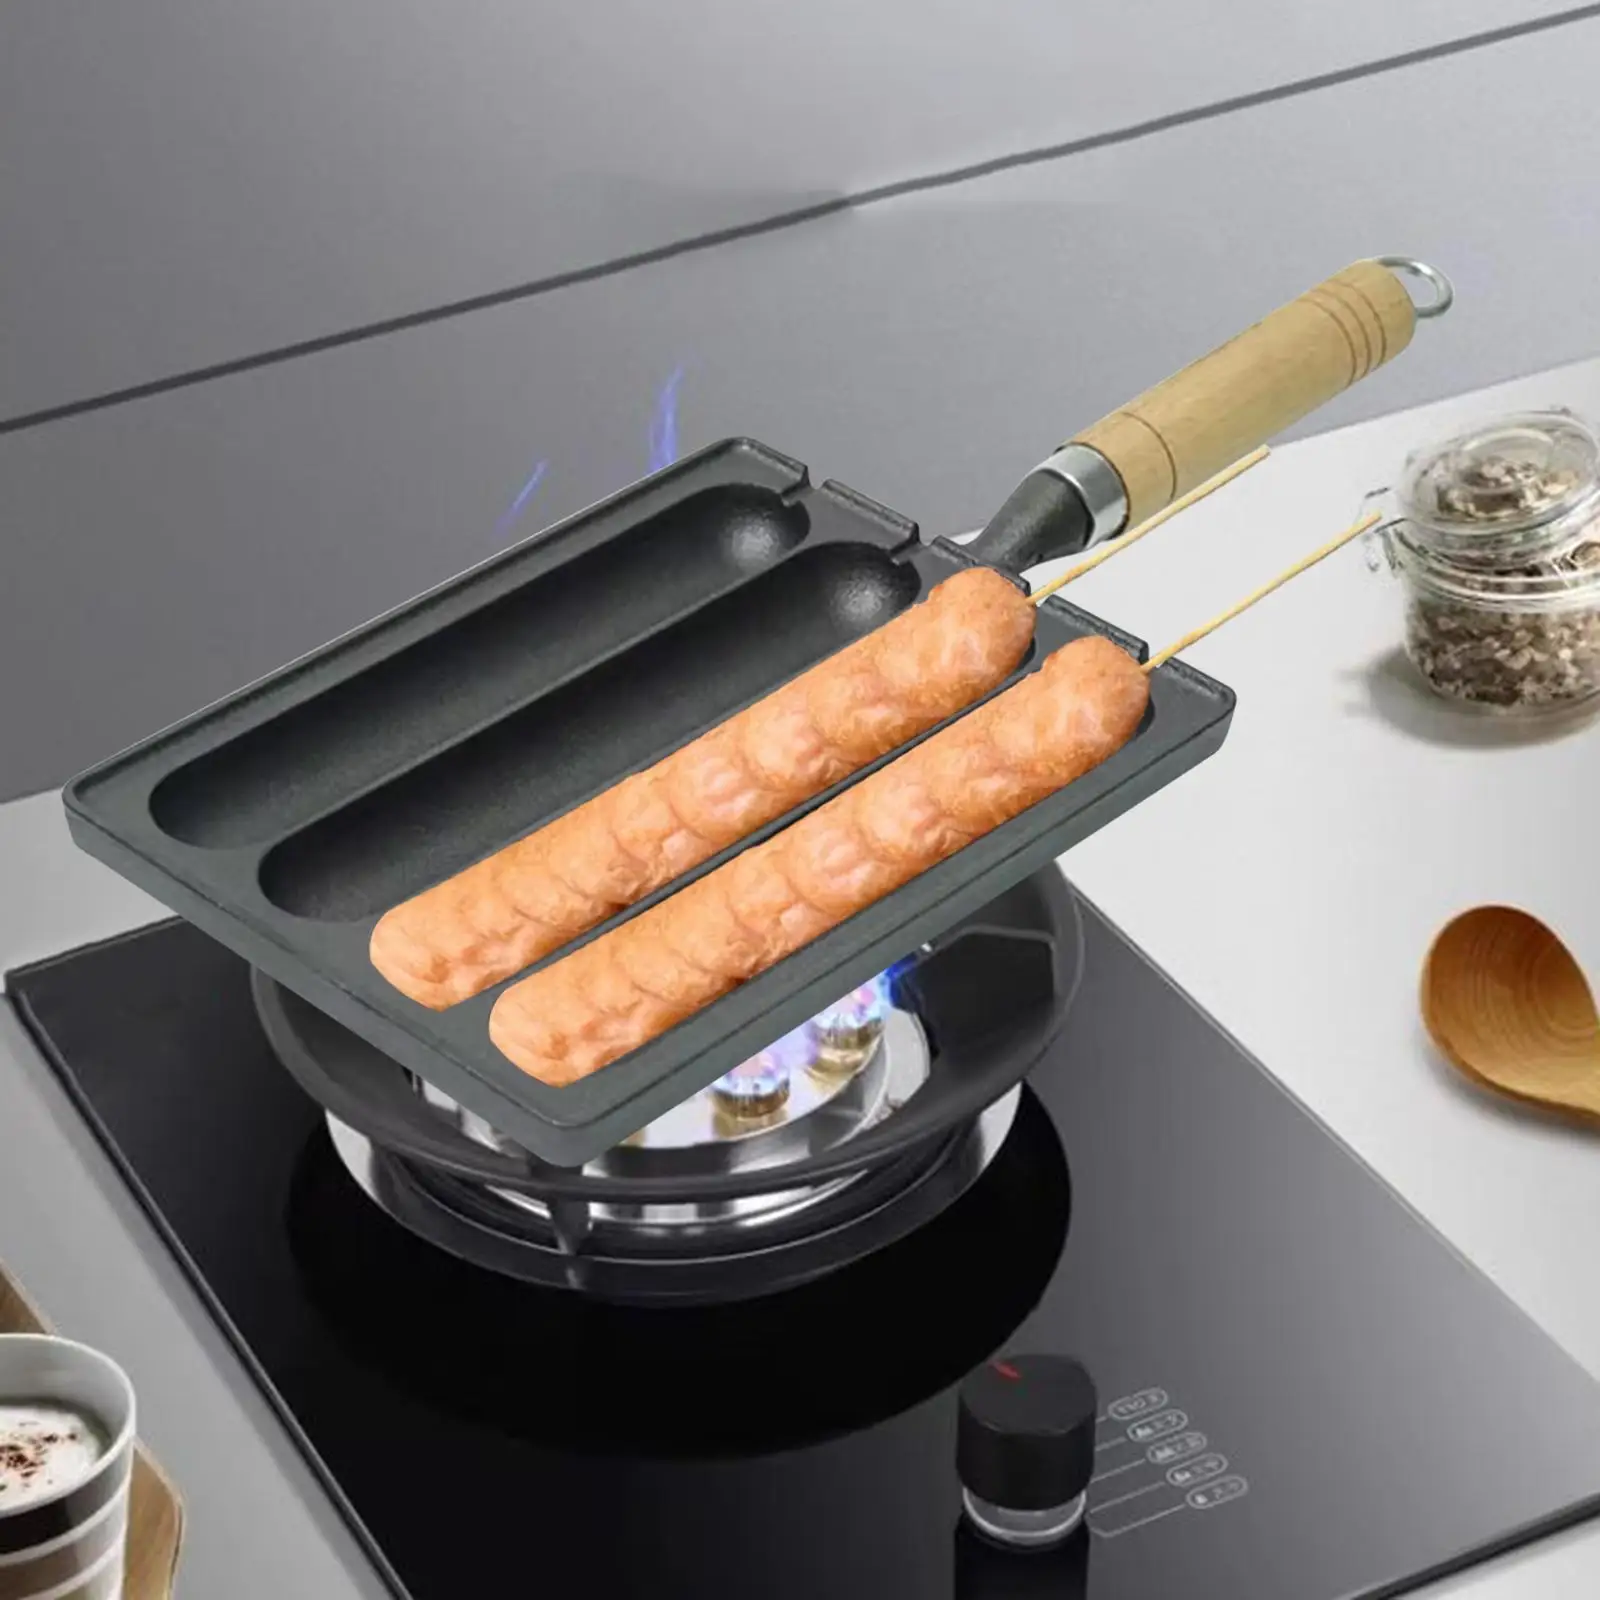 Sausage Grilling Pan Wooden Handle Nonstick DIY Homemade Hot Dog Grill Pan Corn Dog Grill Pan for BBQ Breakfast Outdoor Baking